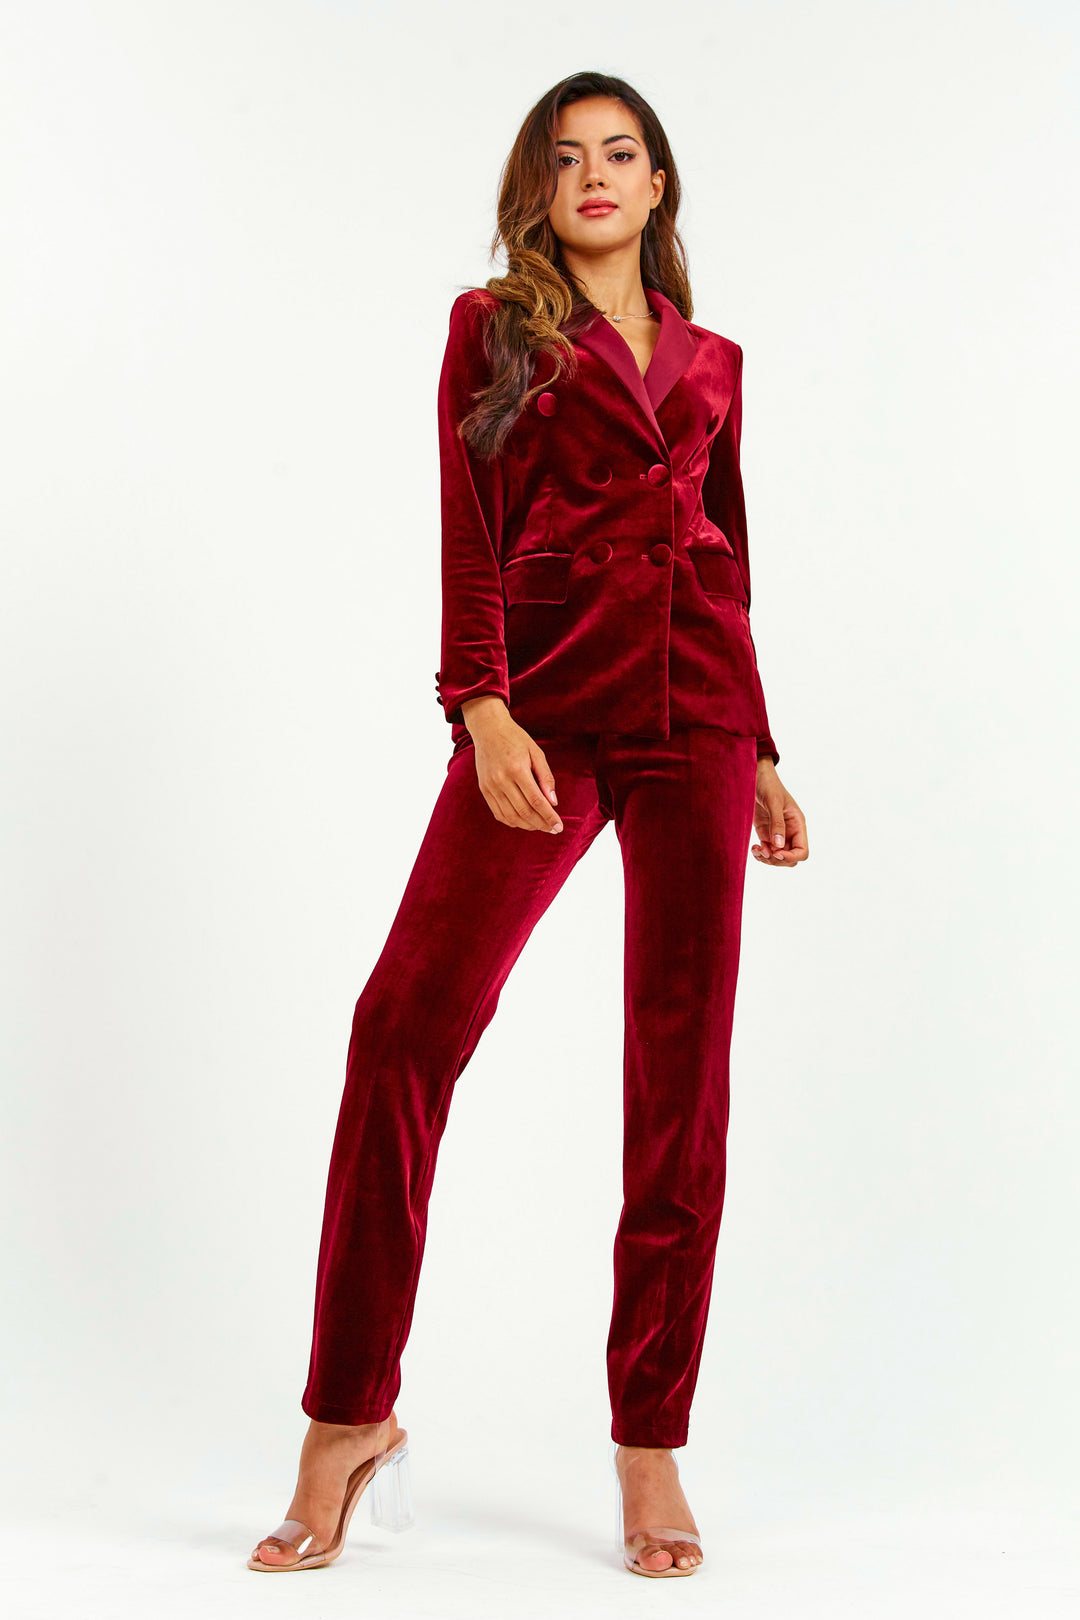 Blood Red Velvet 2 Piece Suit - Full Front View 3